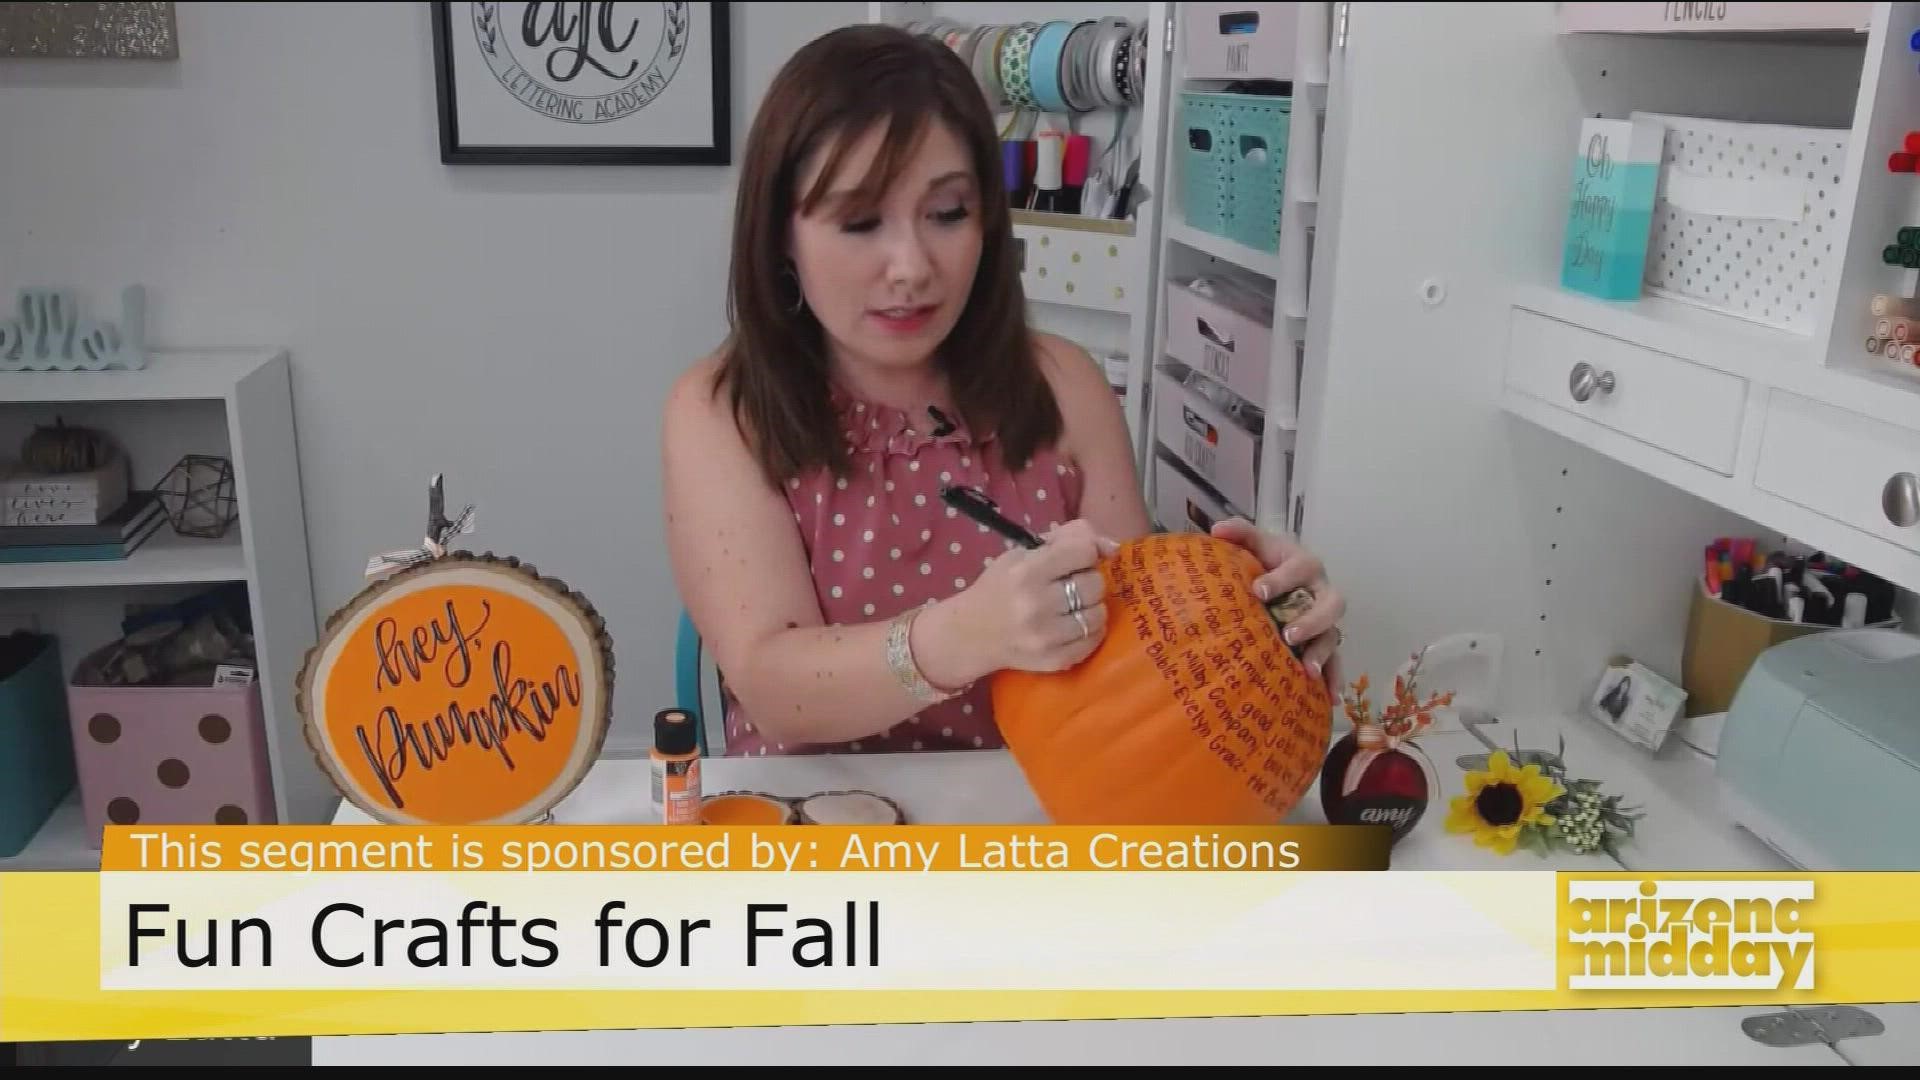 Amy Latta, Author & Craft Expert, shows us how to create 3 Fall Crafts including a Thankful Pumpkin perfect for Thanksgiving!